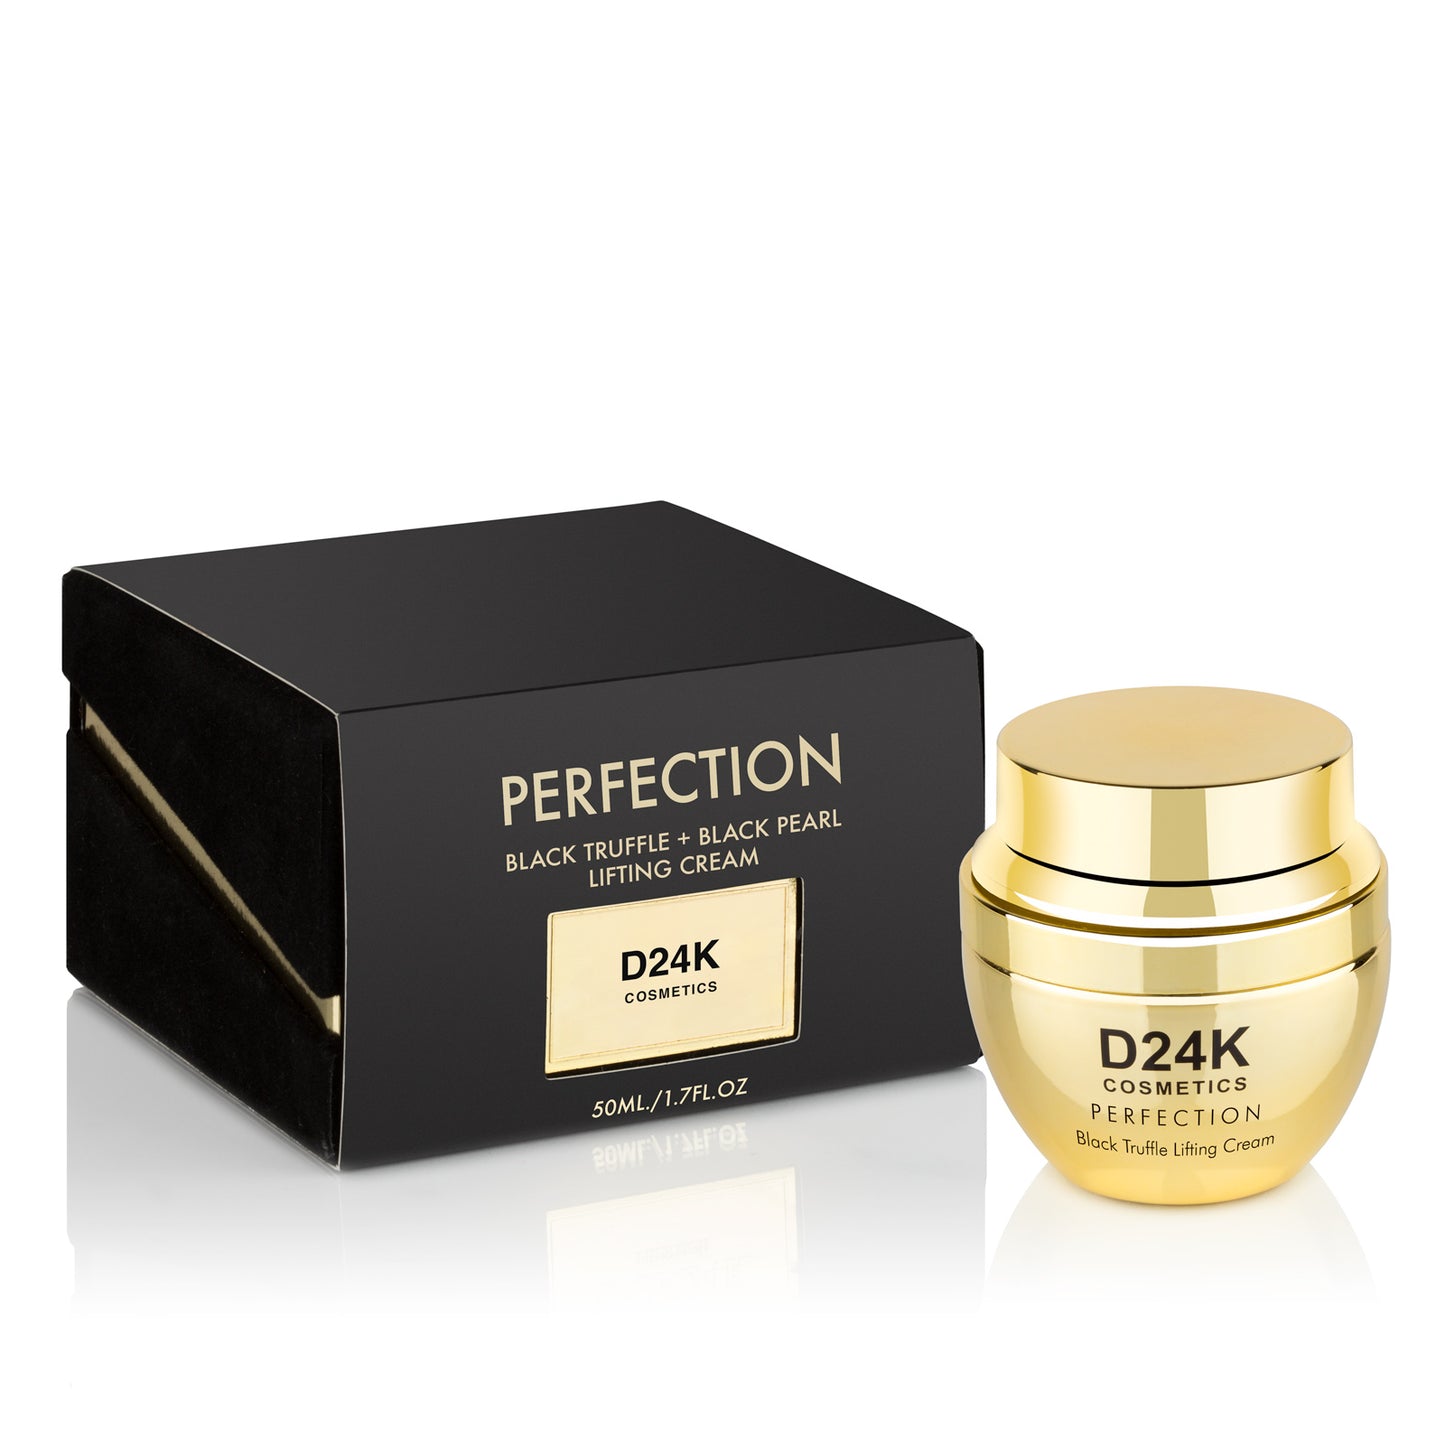 D24K Perfection Lifting Cream with Black Truffle & Black Pearl